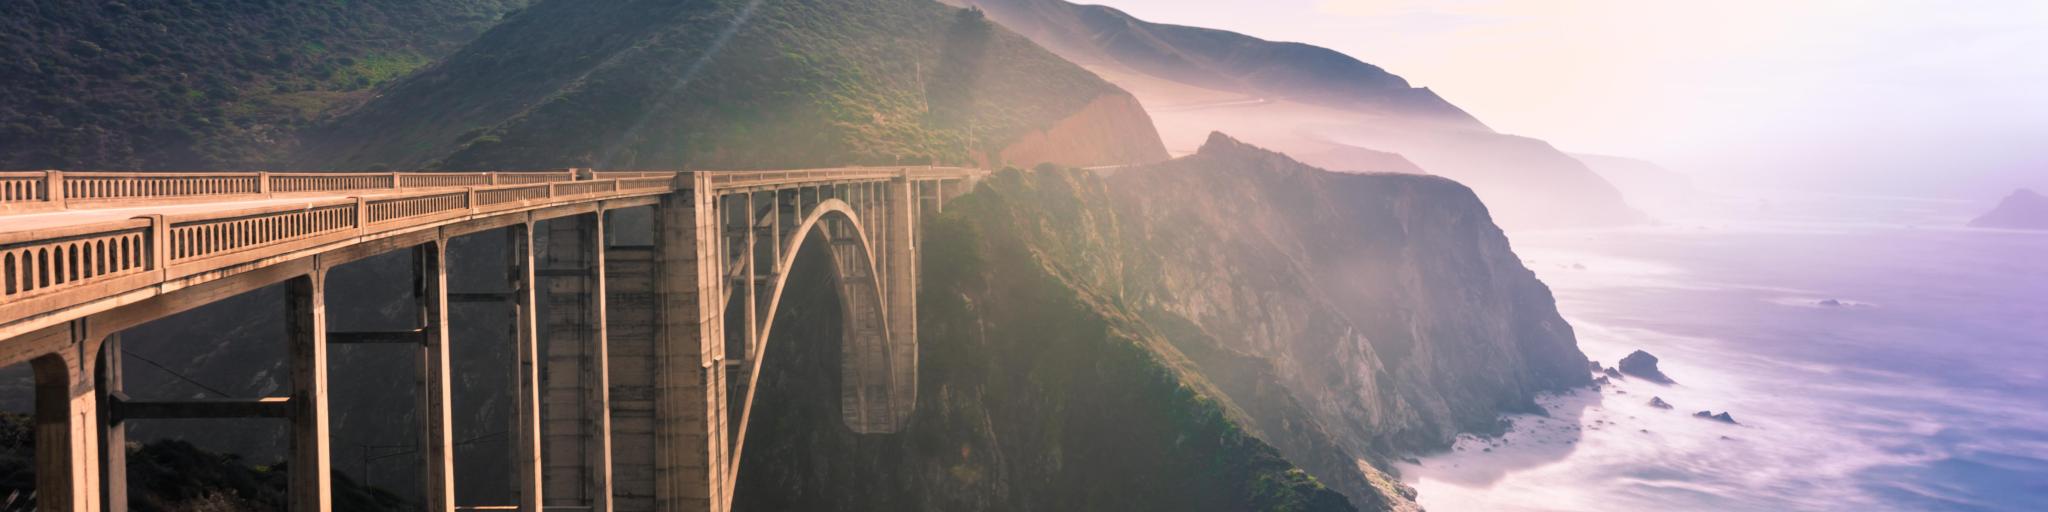 Beautiful view of the famous bridge from Big Sur direction with misty ocean in the distance